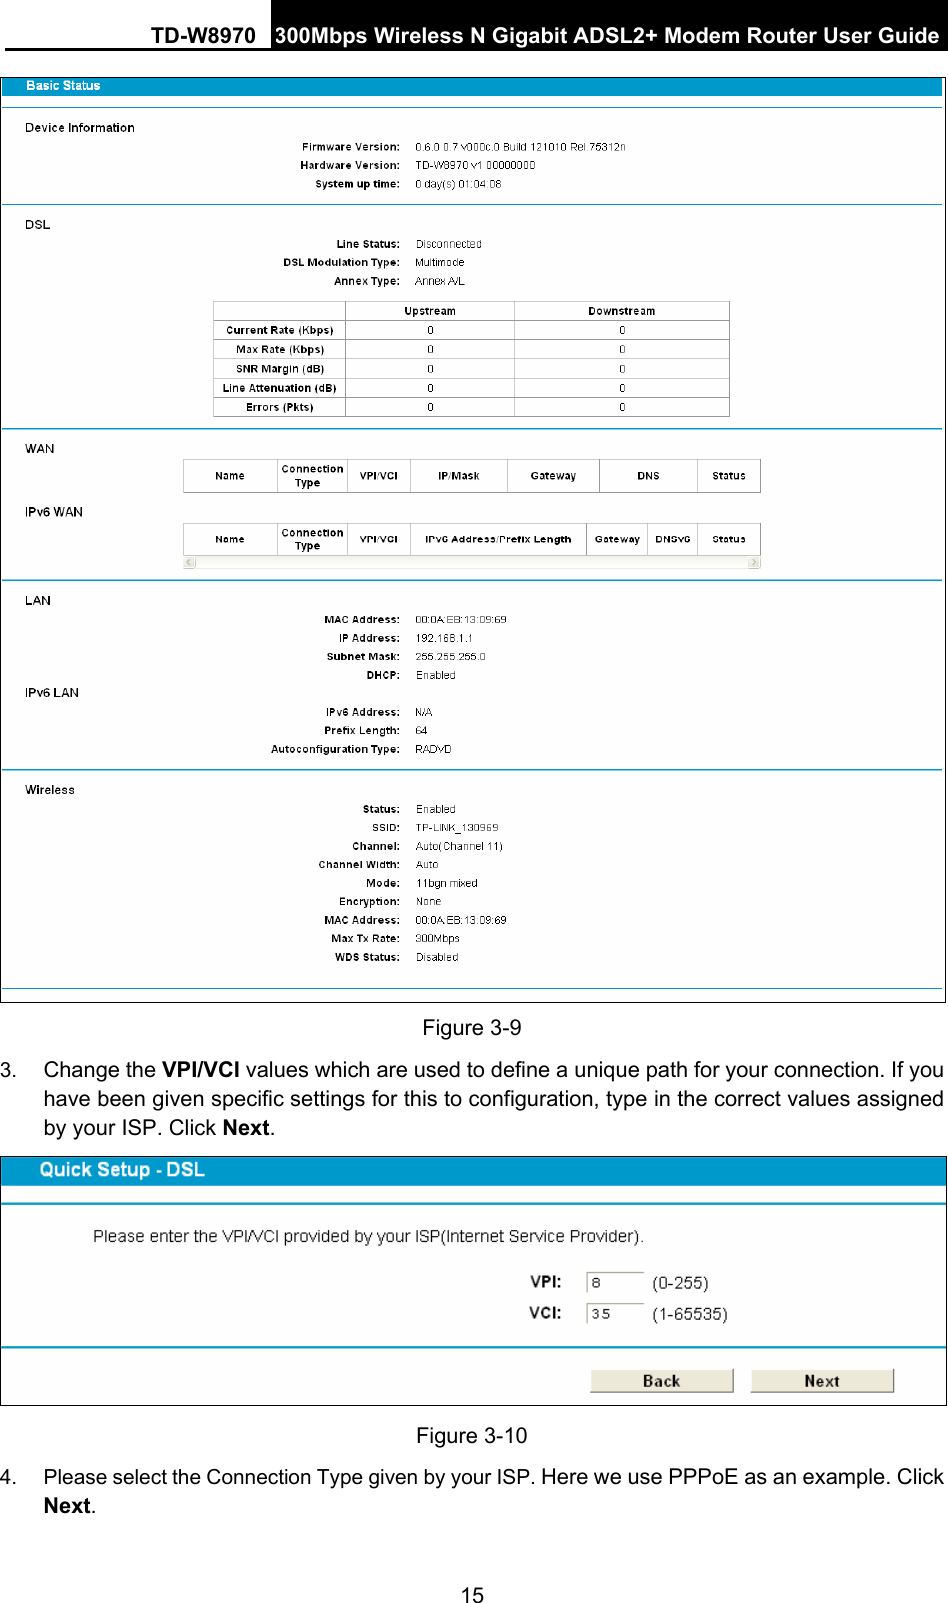 TD-W8970 300Mbps Wireless N Gigabit ADSL2+ Modem Router User Guide 15  Figure 3-9 3.  Change the VPI/VCI values which are used to define a unique path for your connection. If you have been given specific settings for this to configuration, type in the correct values assigned by your ISP. Click Next.  Figure 3-10 4.  Please select the Connection Type given by your ISP. Here we use PPPoE as an example. Click Next. 